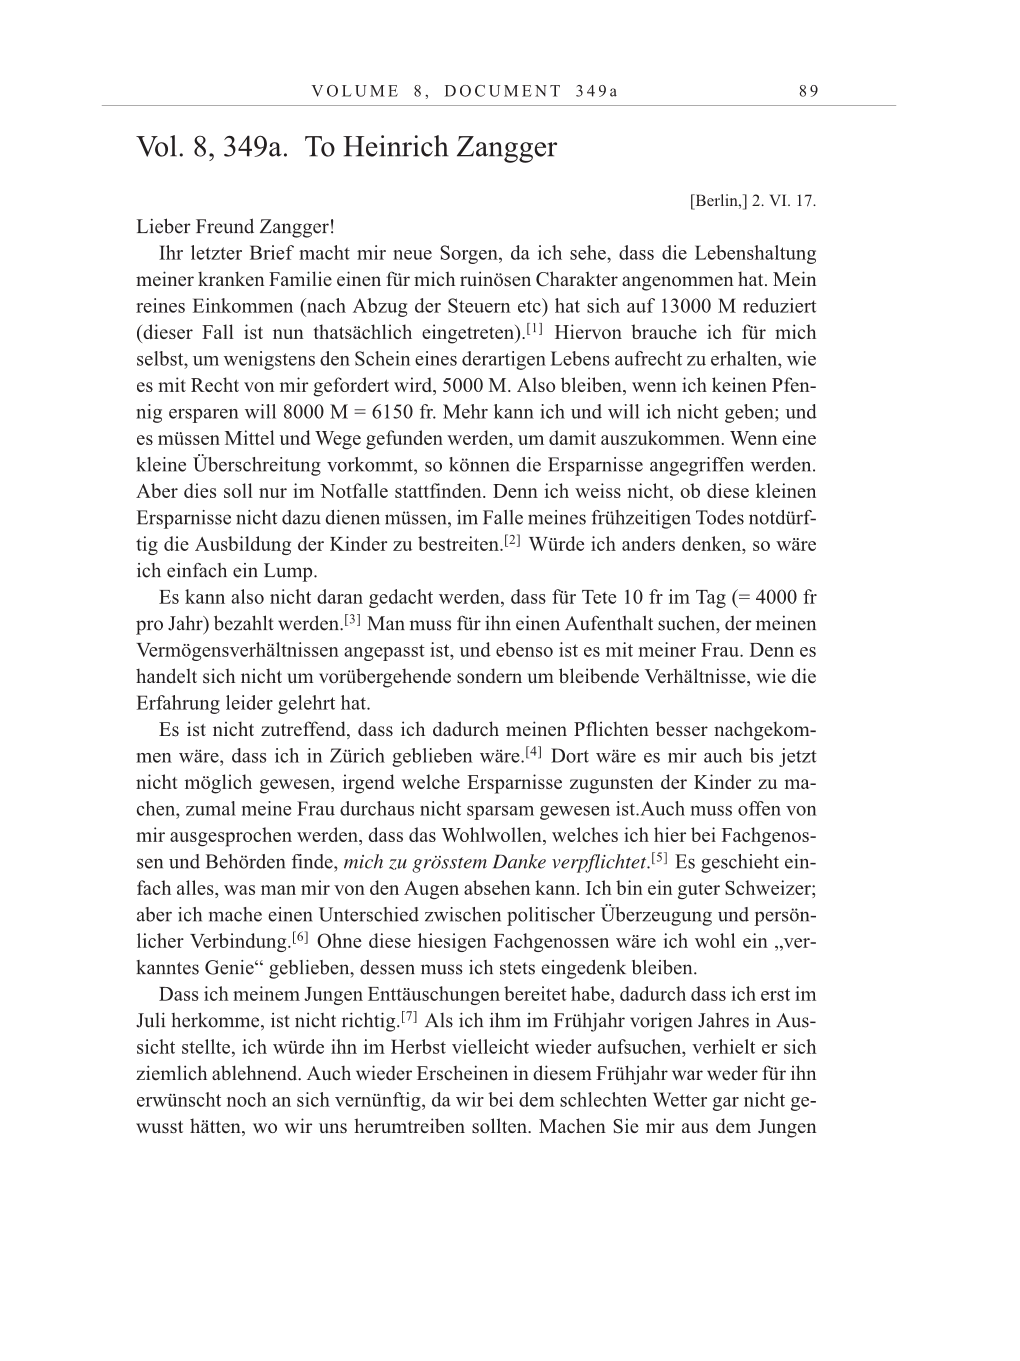 Volume 10: The Berlin Years: Correspondence May-December 1920 / Supplementary Correspondence 1909-1920 page 89